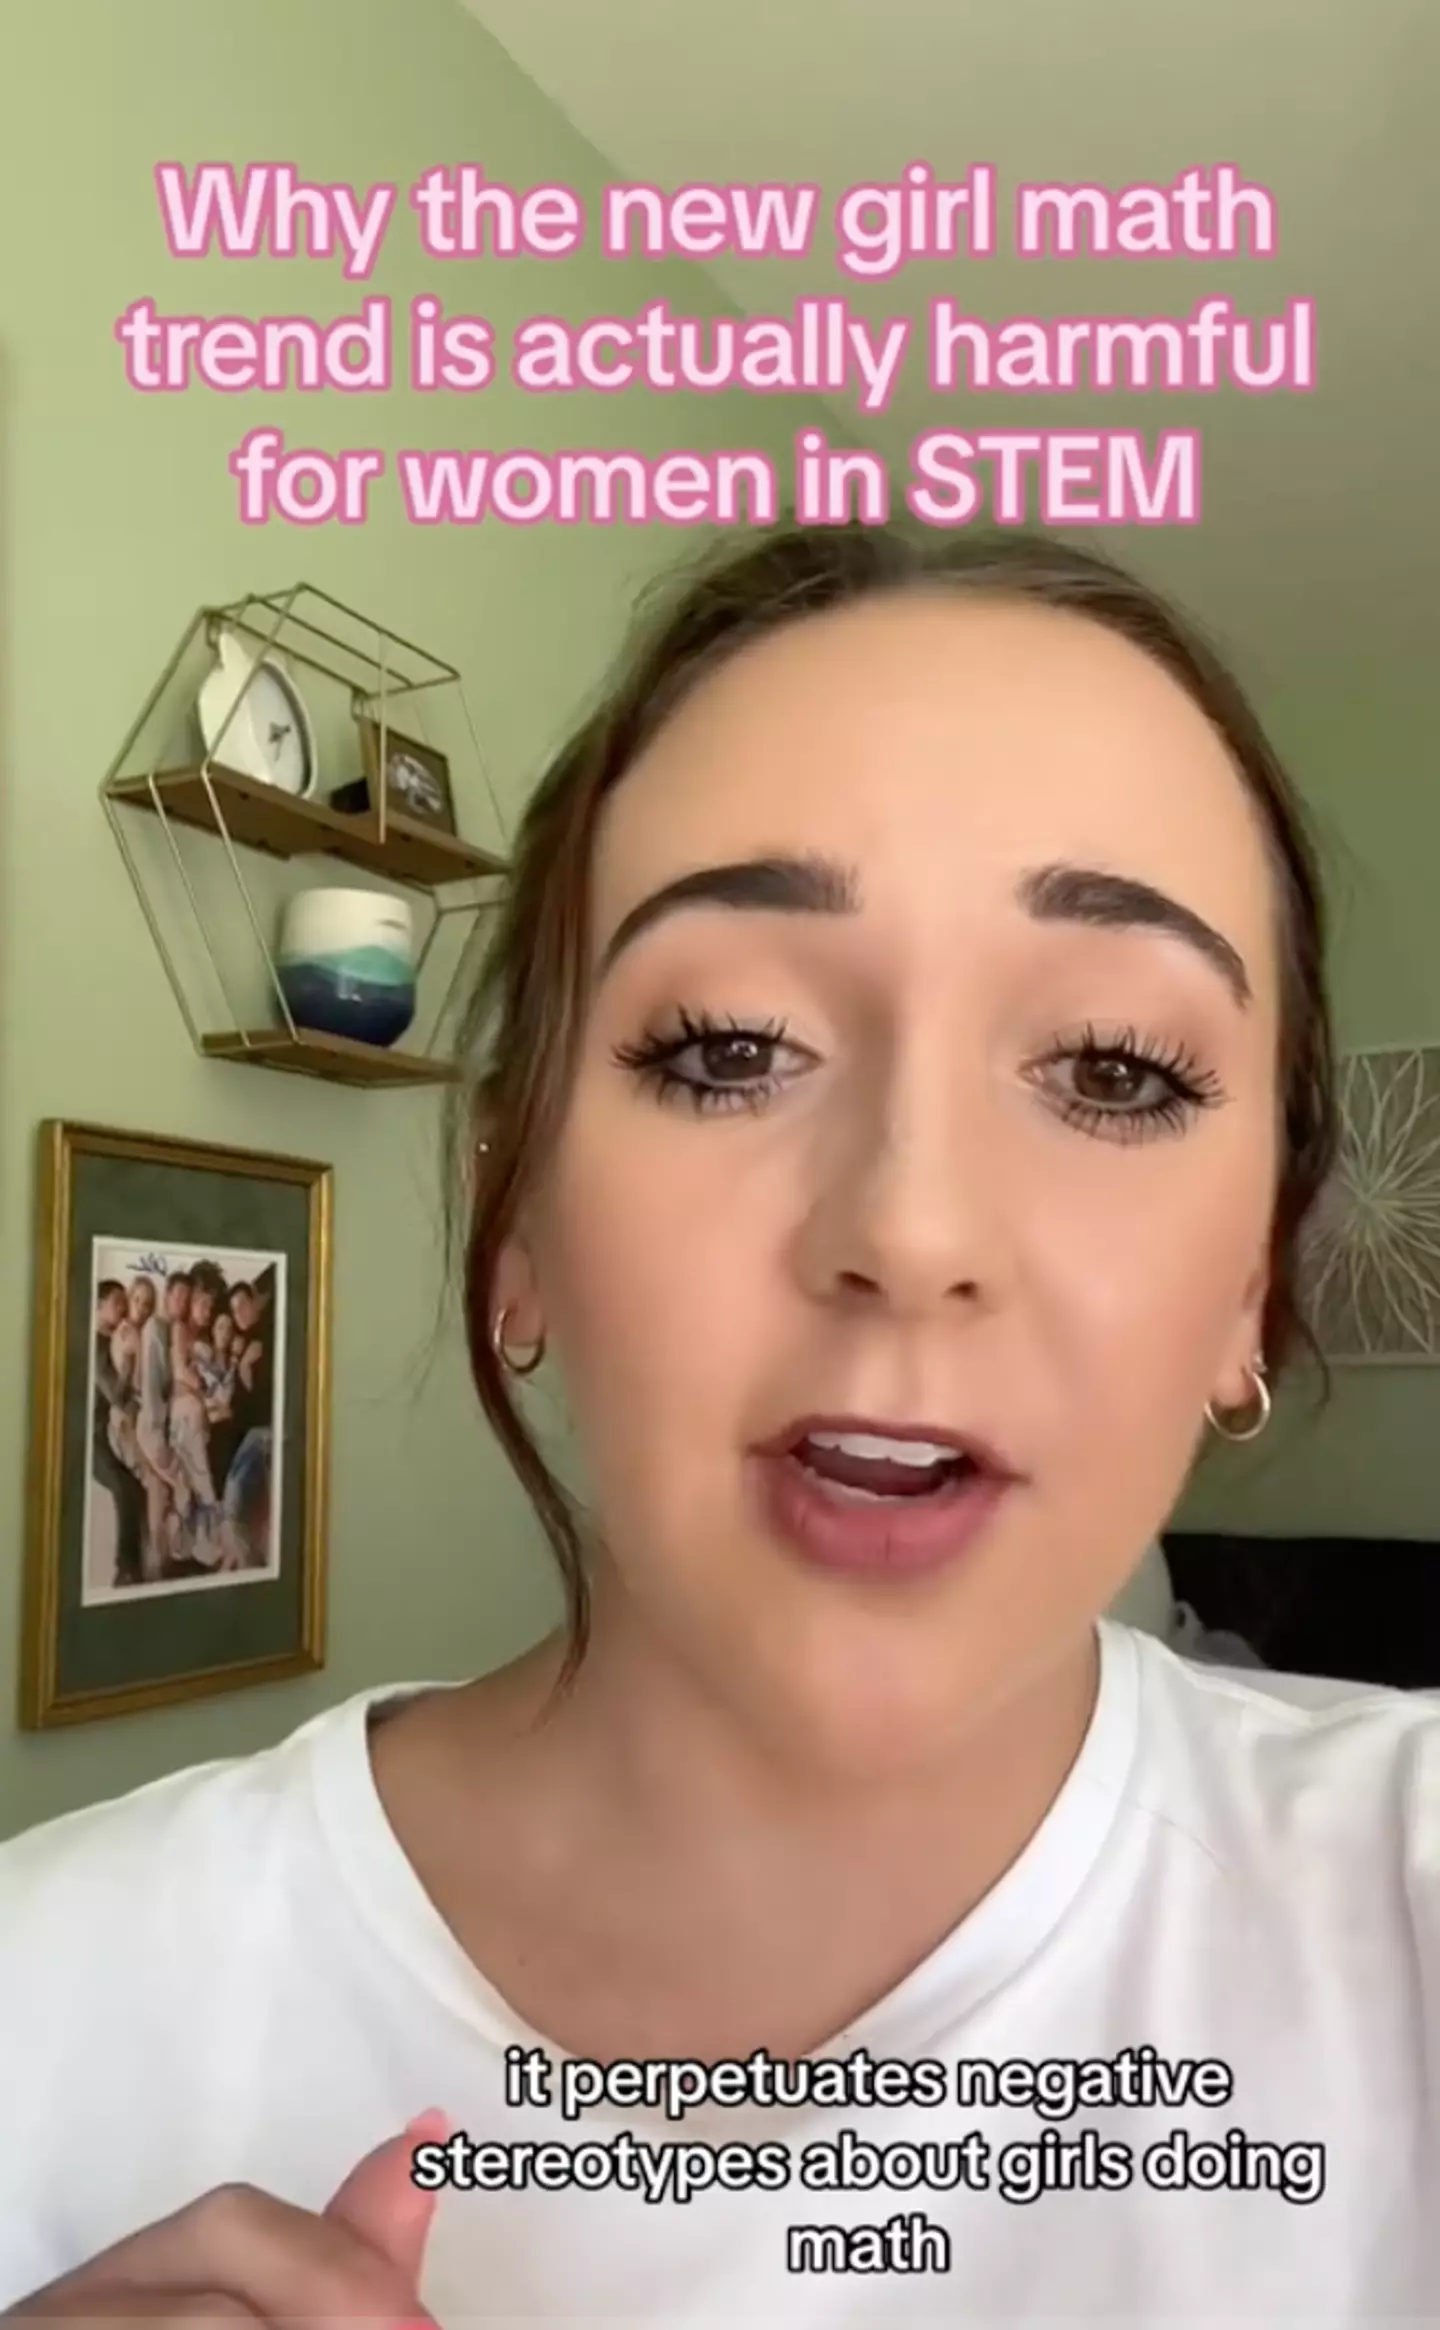 TikToker Jess Ramos mapped out why she thinks the viral 'girl math' is 'harmful'.